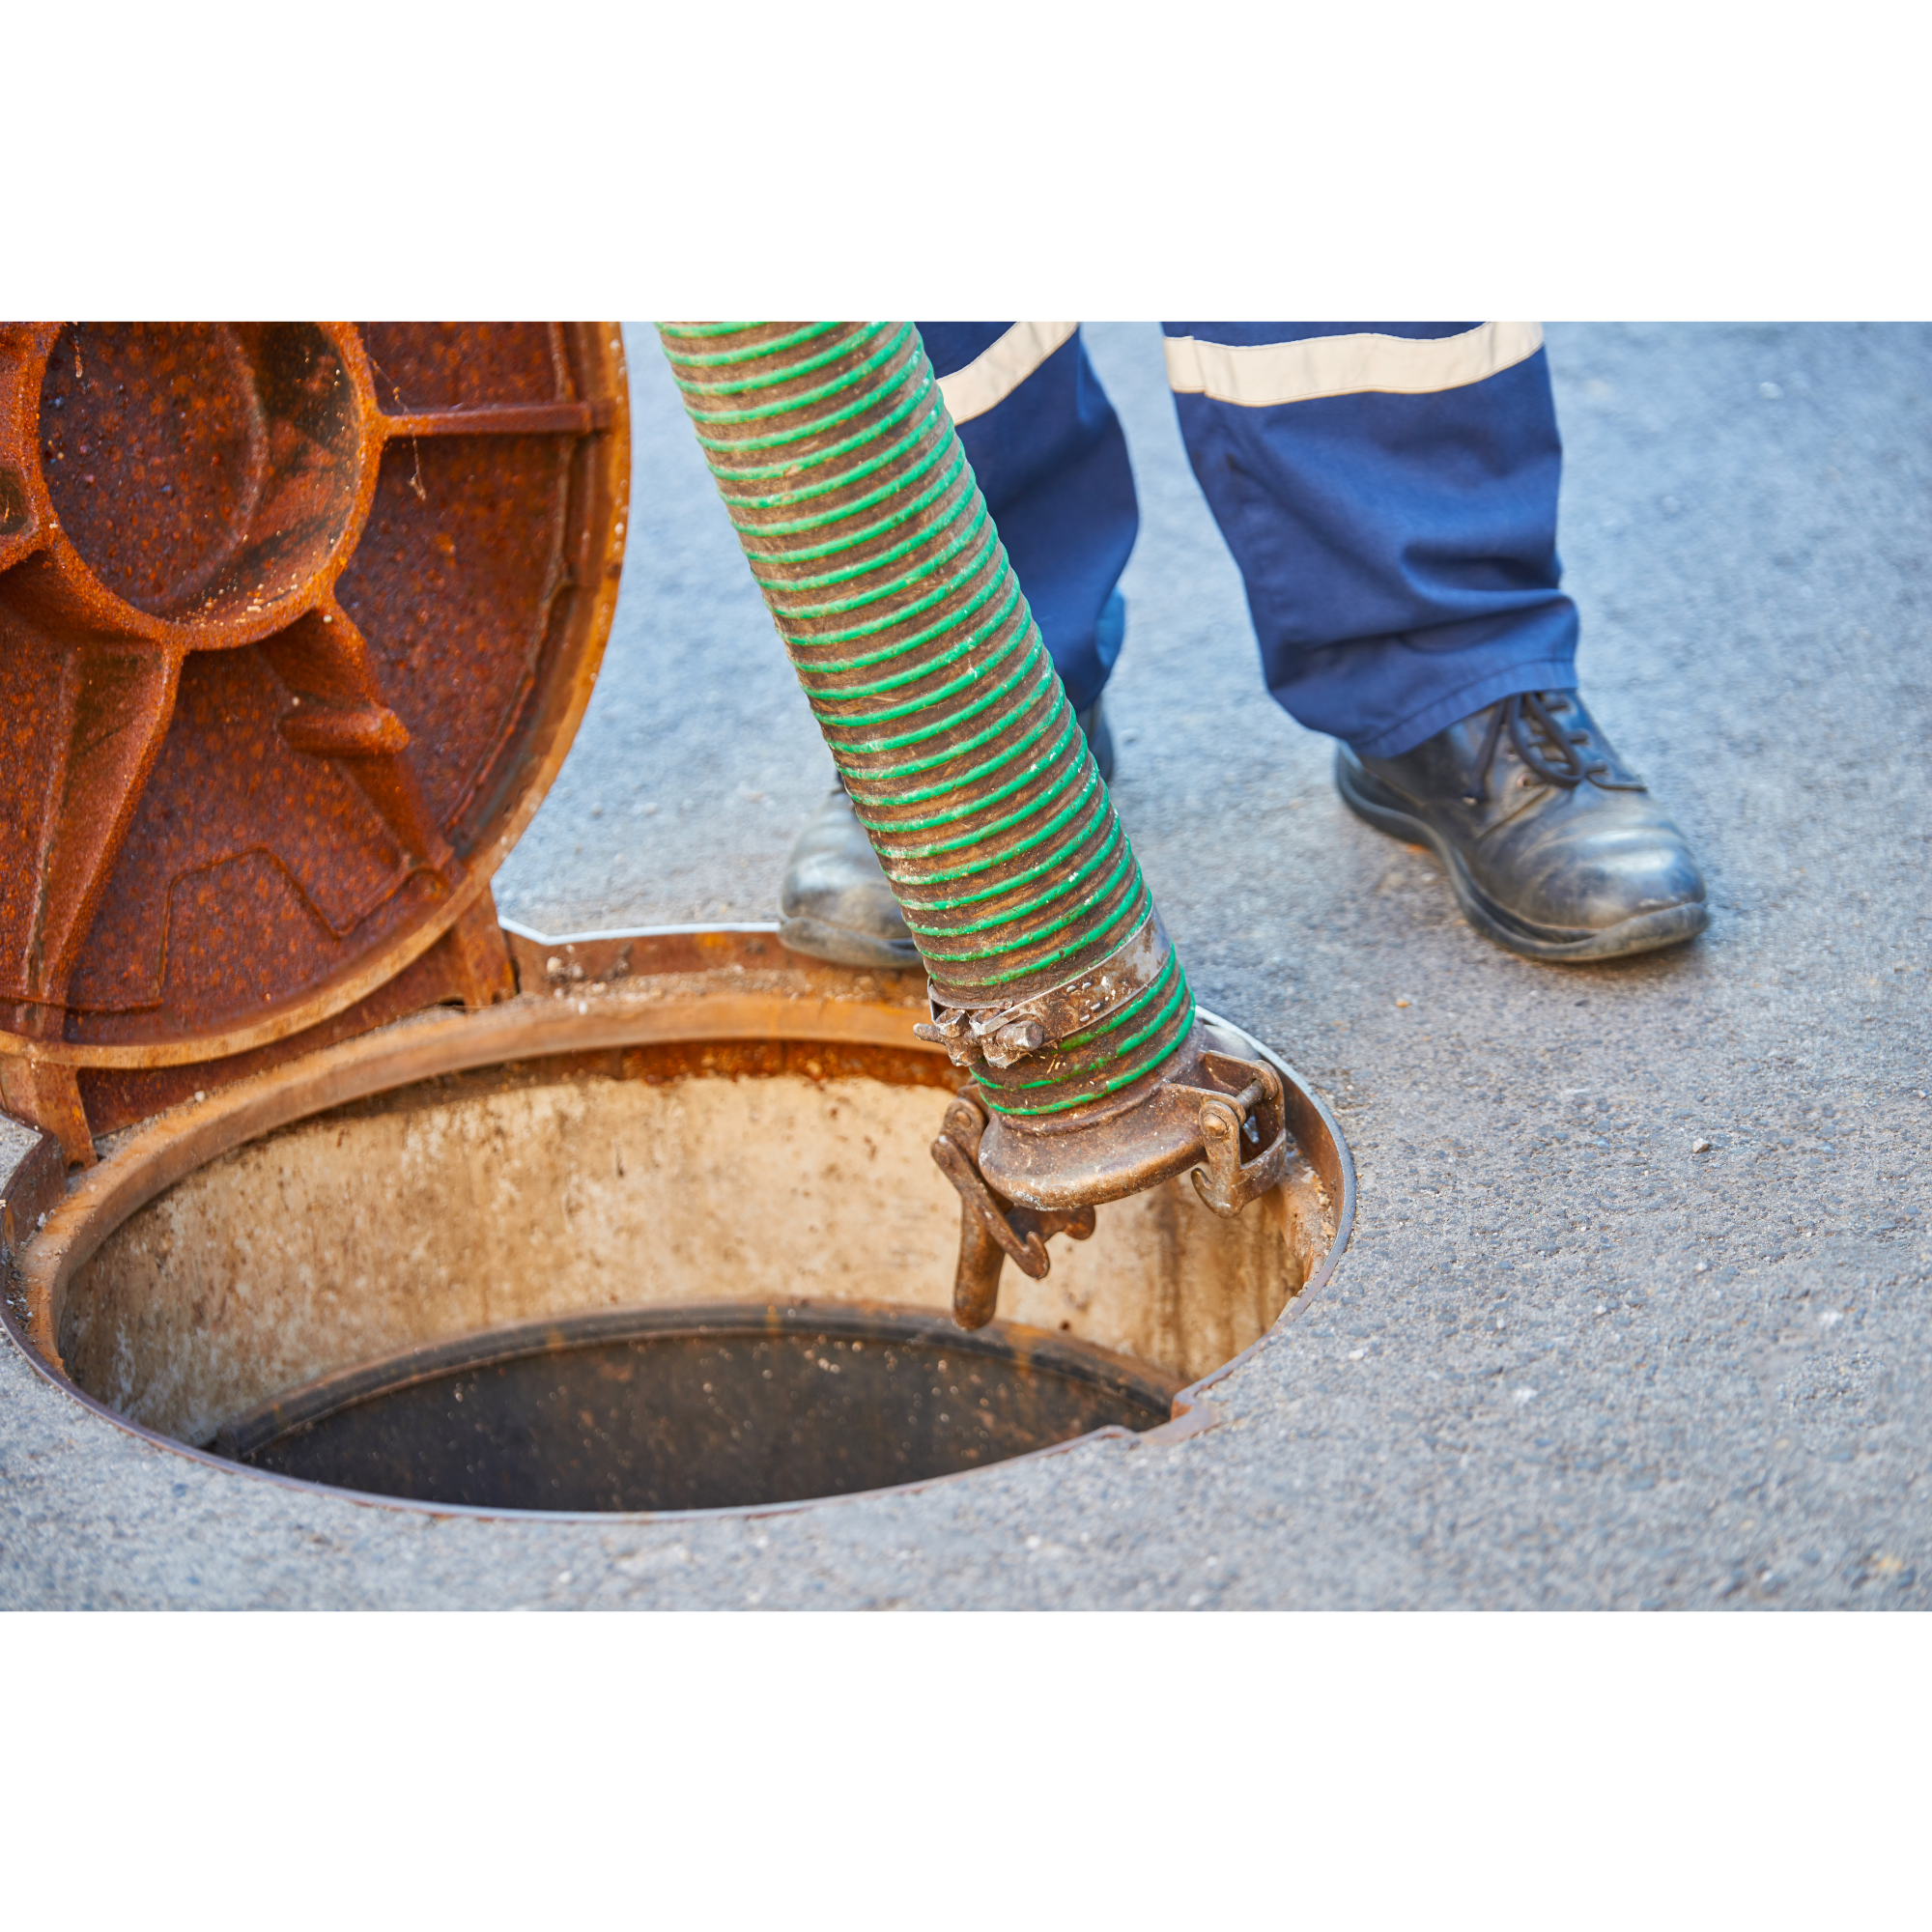 "Cleaning the depths: Brave workers tackle the grimy task of sewer cleaning, ensuring a hygienic and functional underground network for the community's well-being."